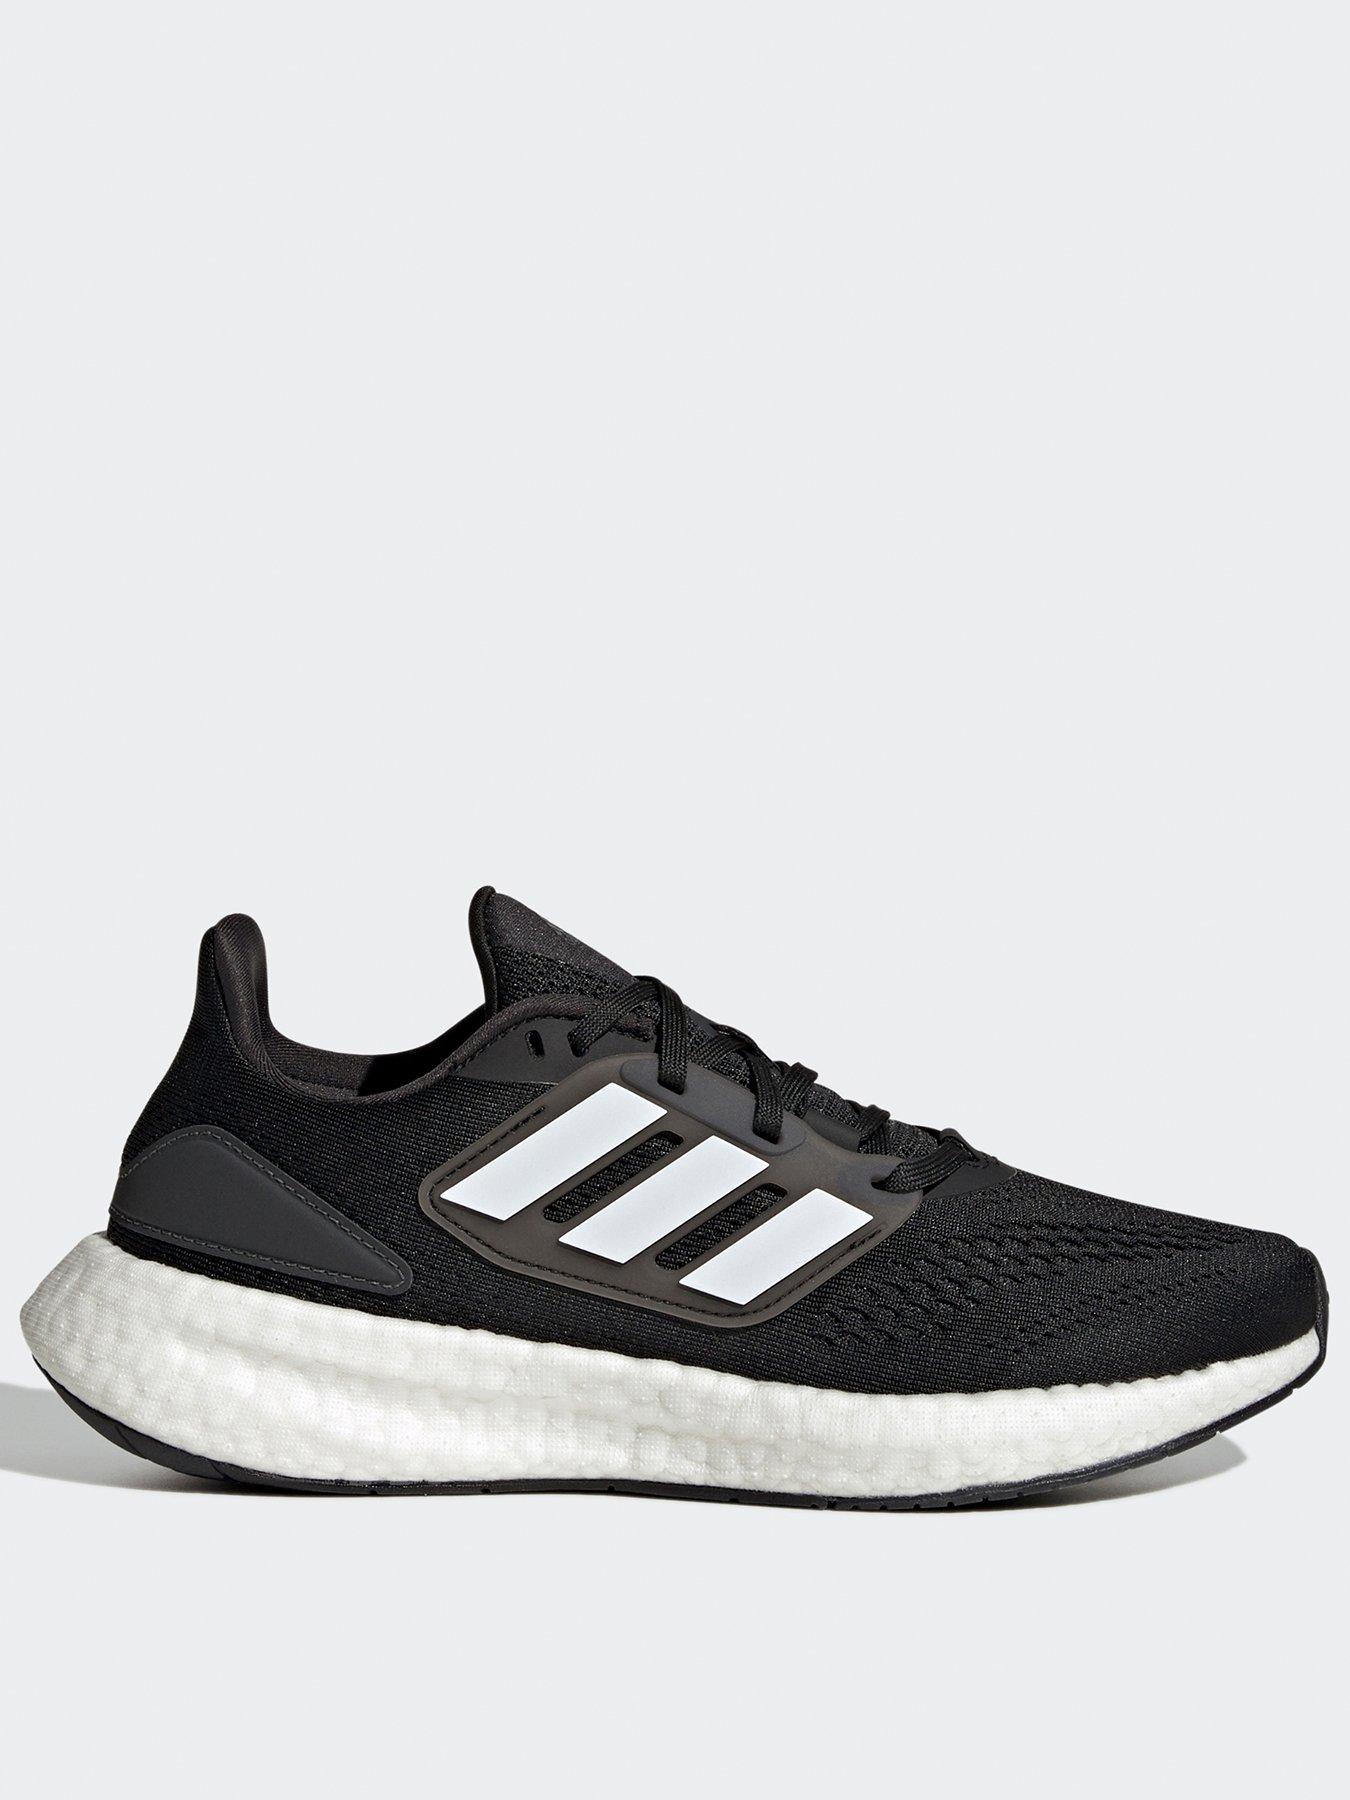 PureBoost 22 rubber-trimmed mesh sneakers